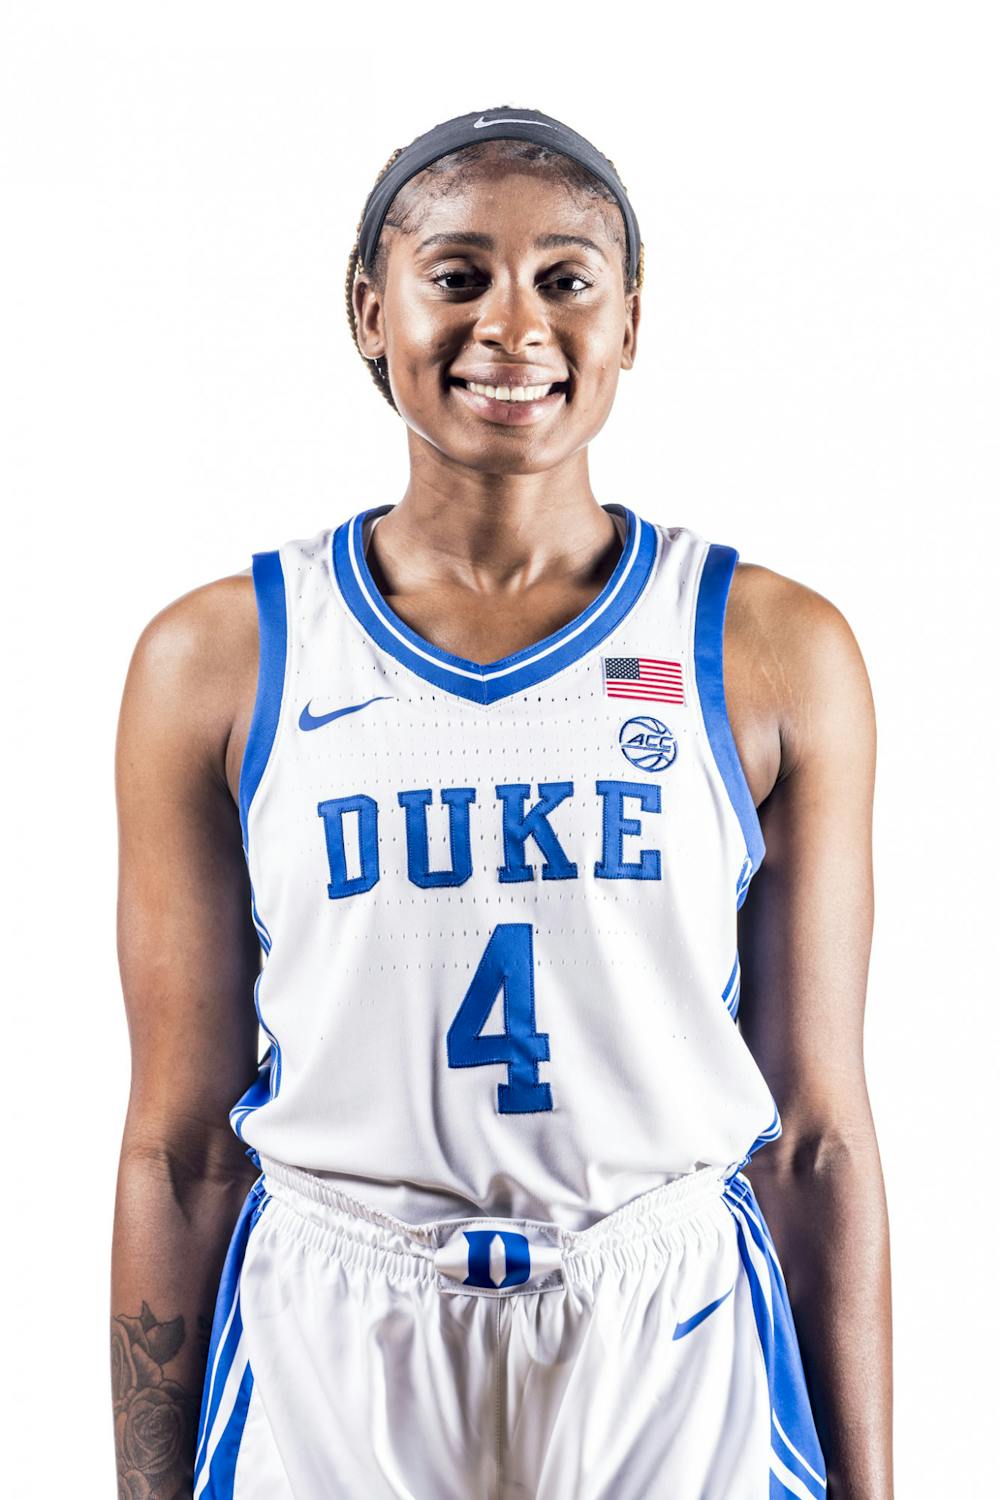 Elizabeth Balogun comes to Duke after three combined seasons at Georgia Tech and Louisville.